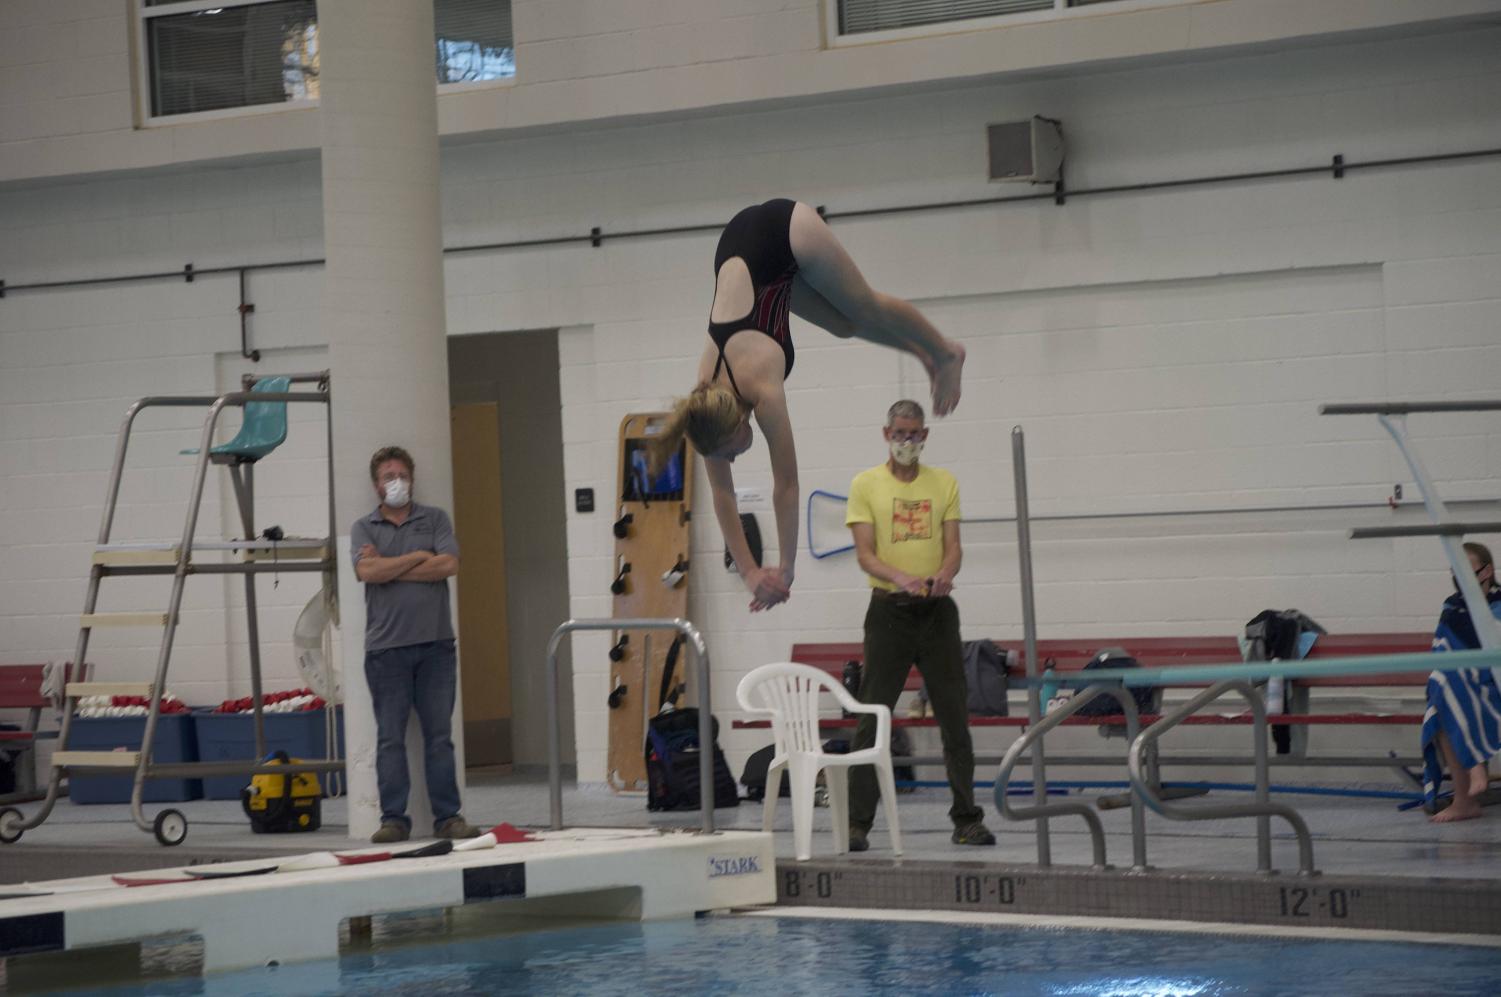 Divers+fly+high%3A+A+photo+Gallery